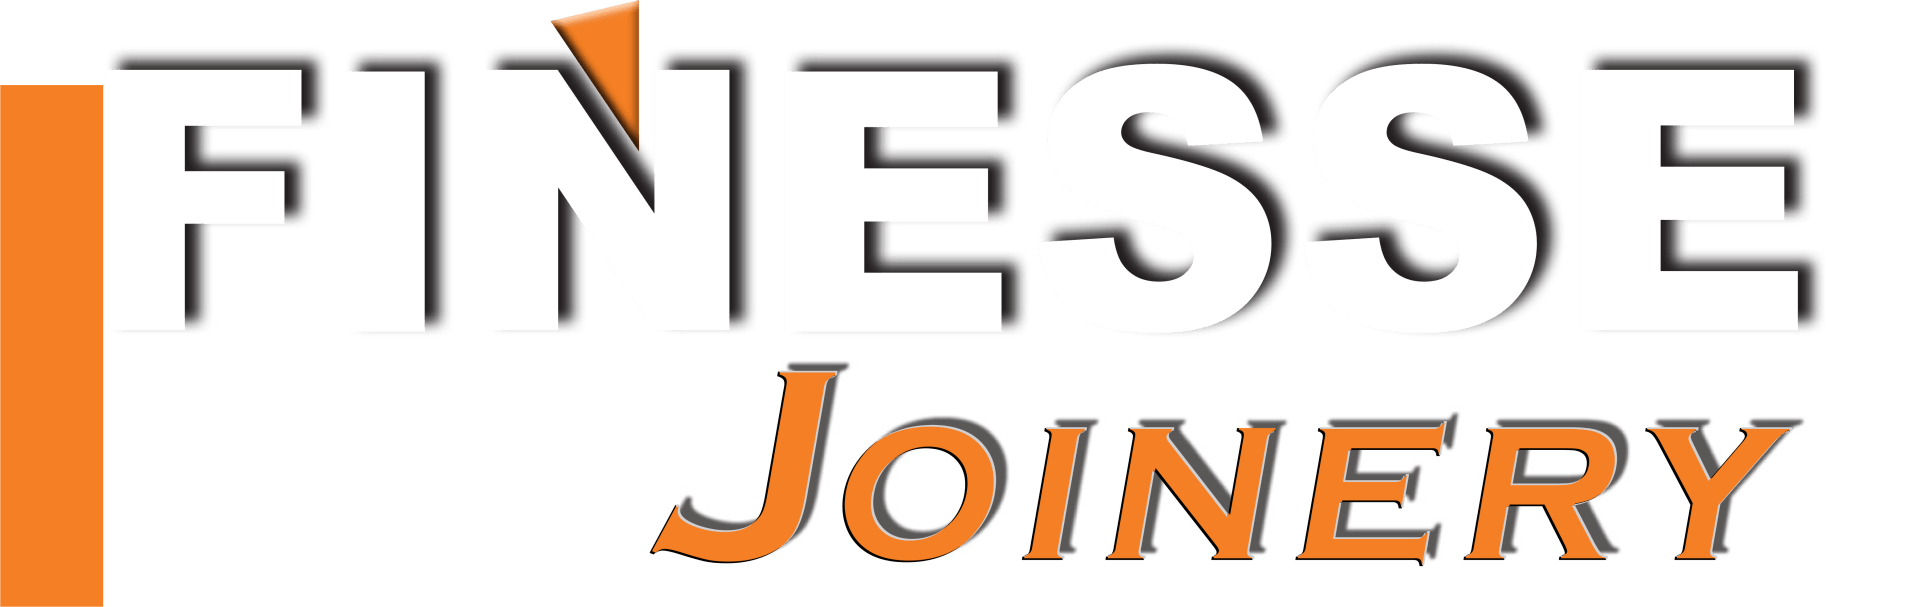 The logo for finesse joinery is orange and black on a white background.